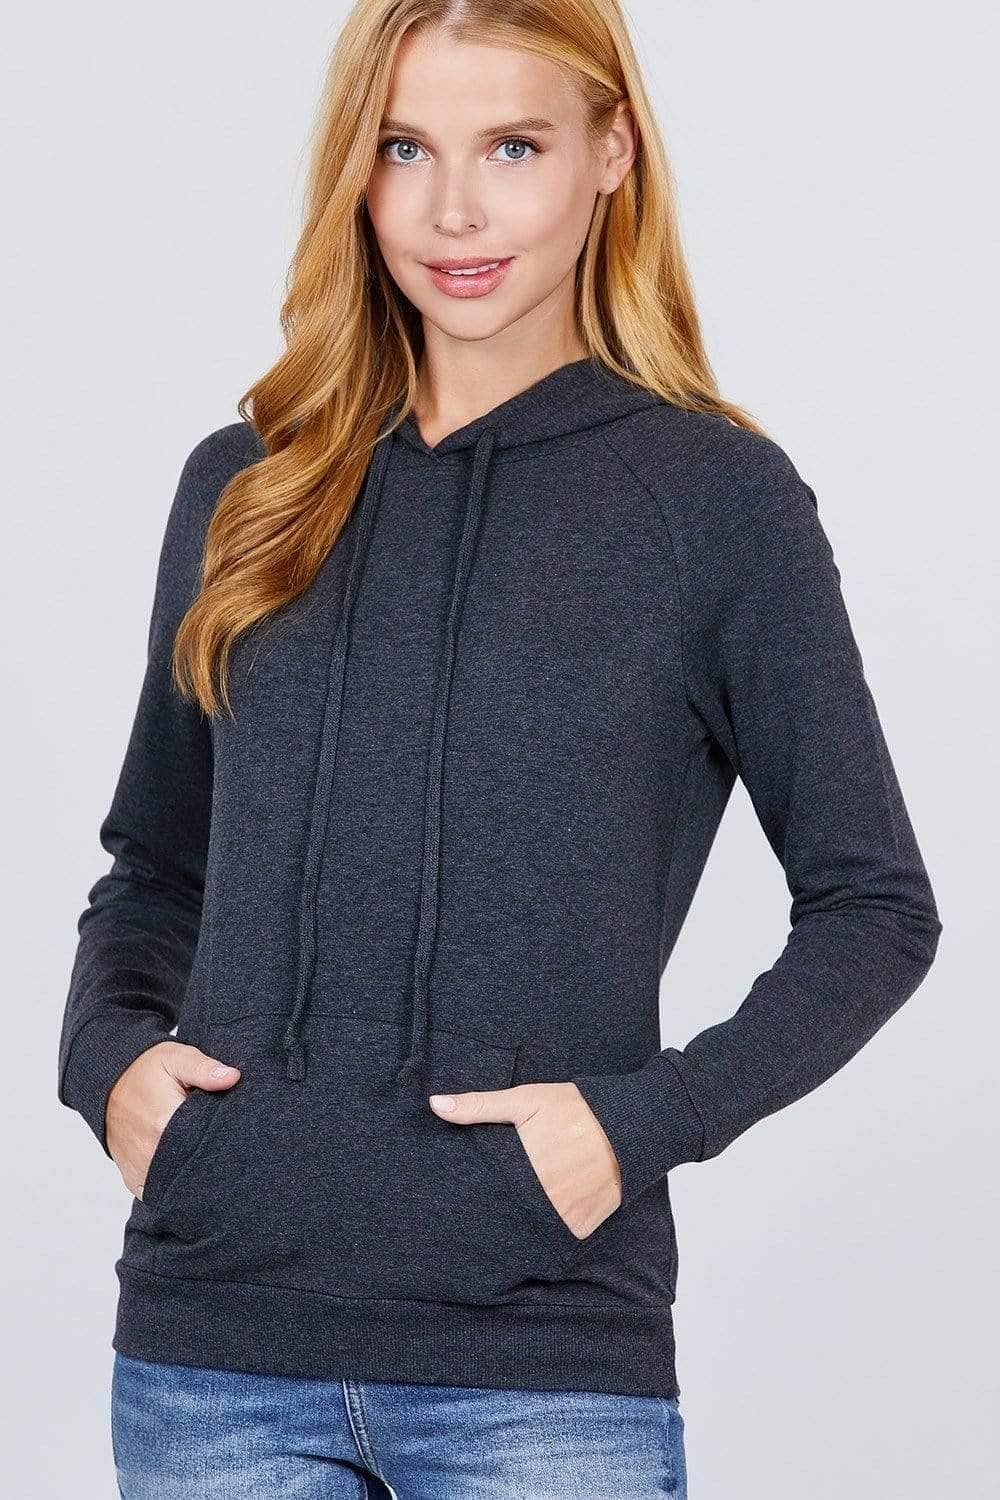 Long Sleeve French Terry Sweatshirt-Charcoal Gray - Westside Shopping Therapy